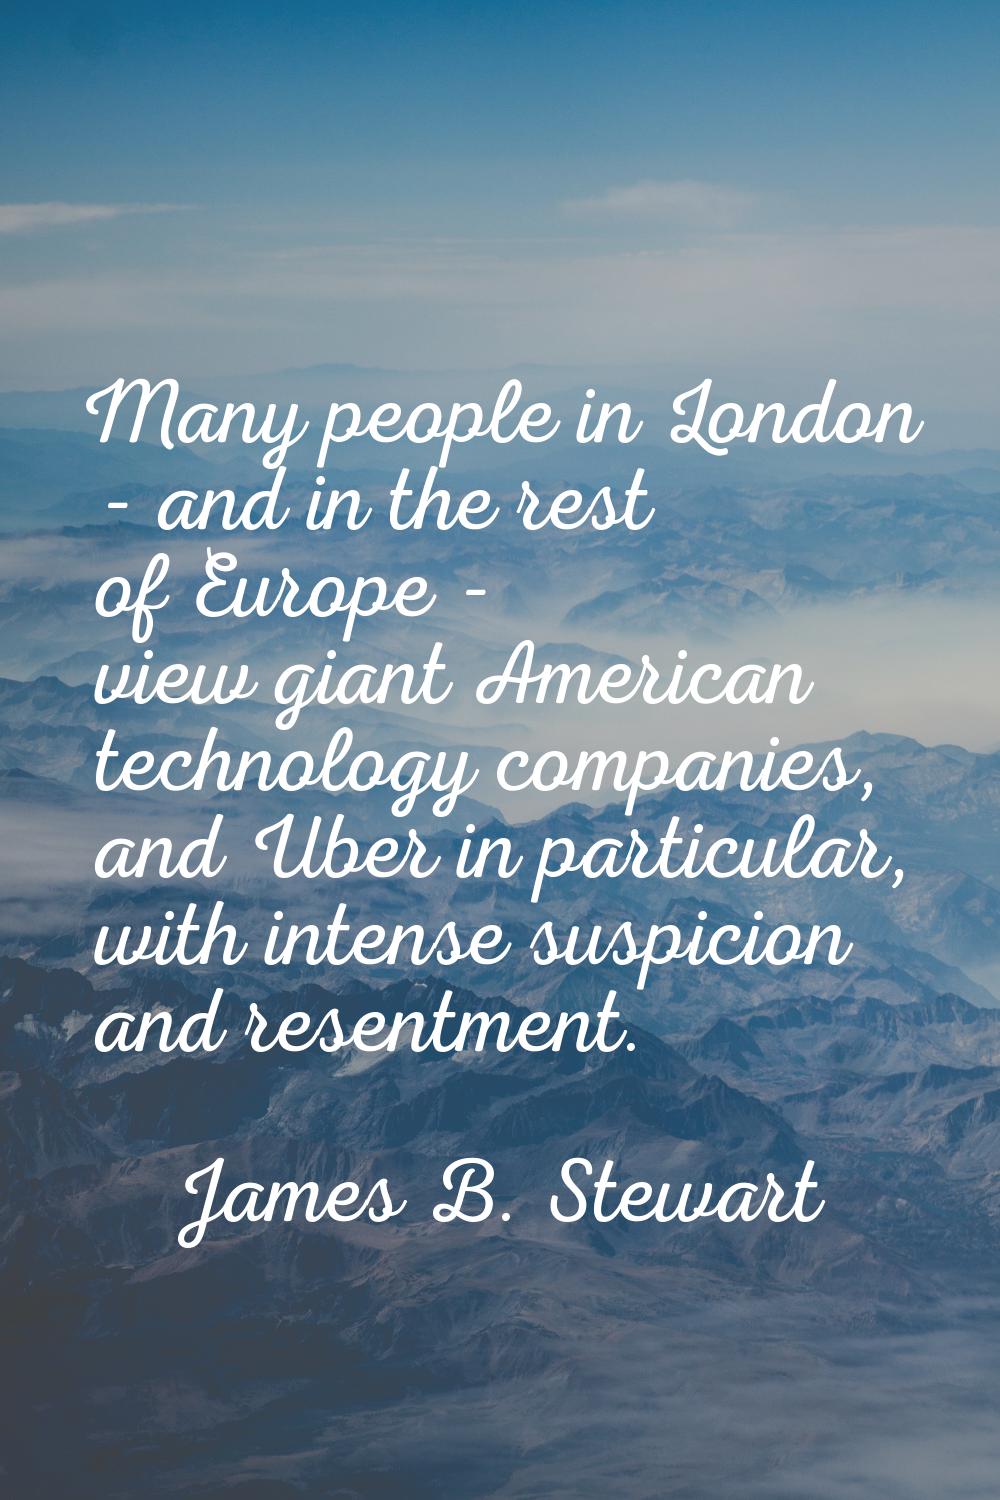 Many people in London - and in the rest of Europe - view giant American technology companies, and U